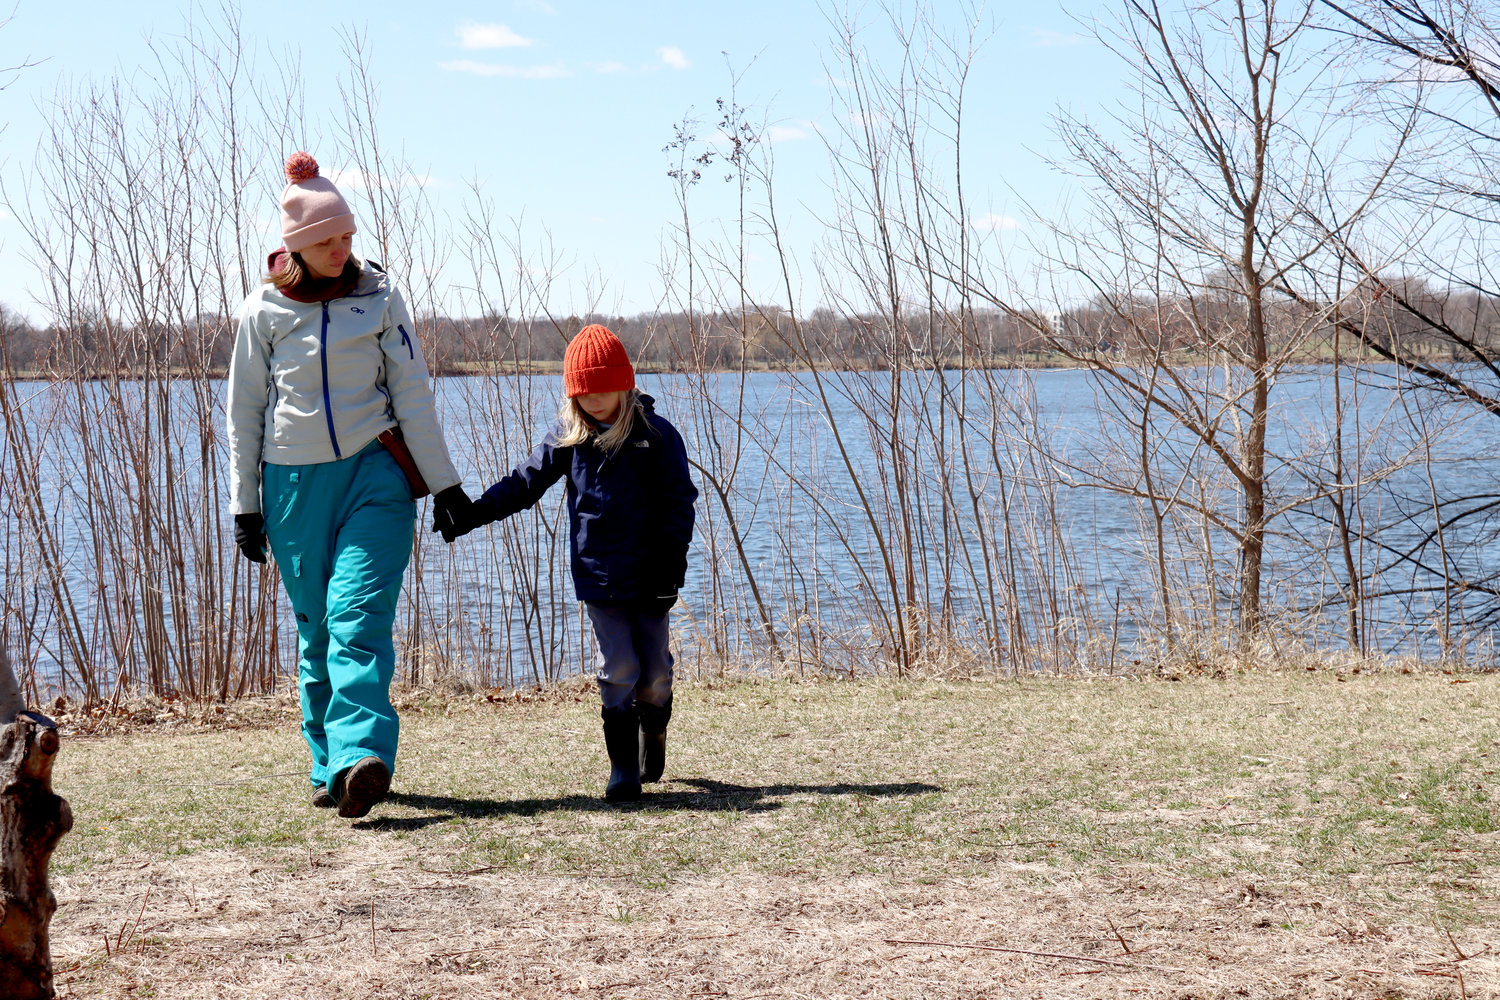 Nicole Cavendar comforts her six-year-old son, Weston, who is concerned about the ducks eating the trash in Lake Hiawatha.